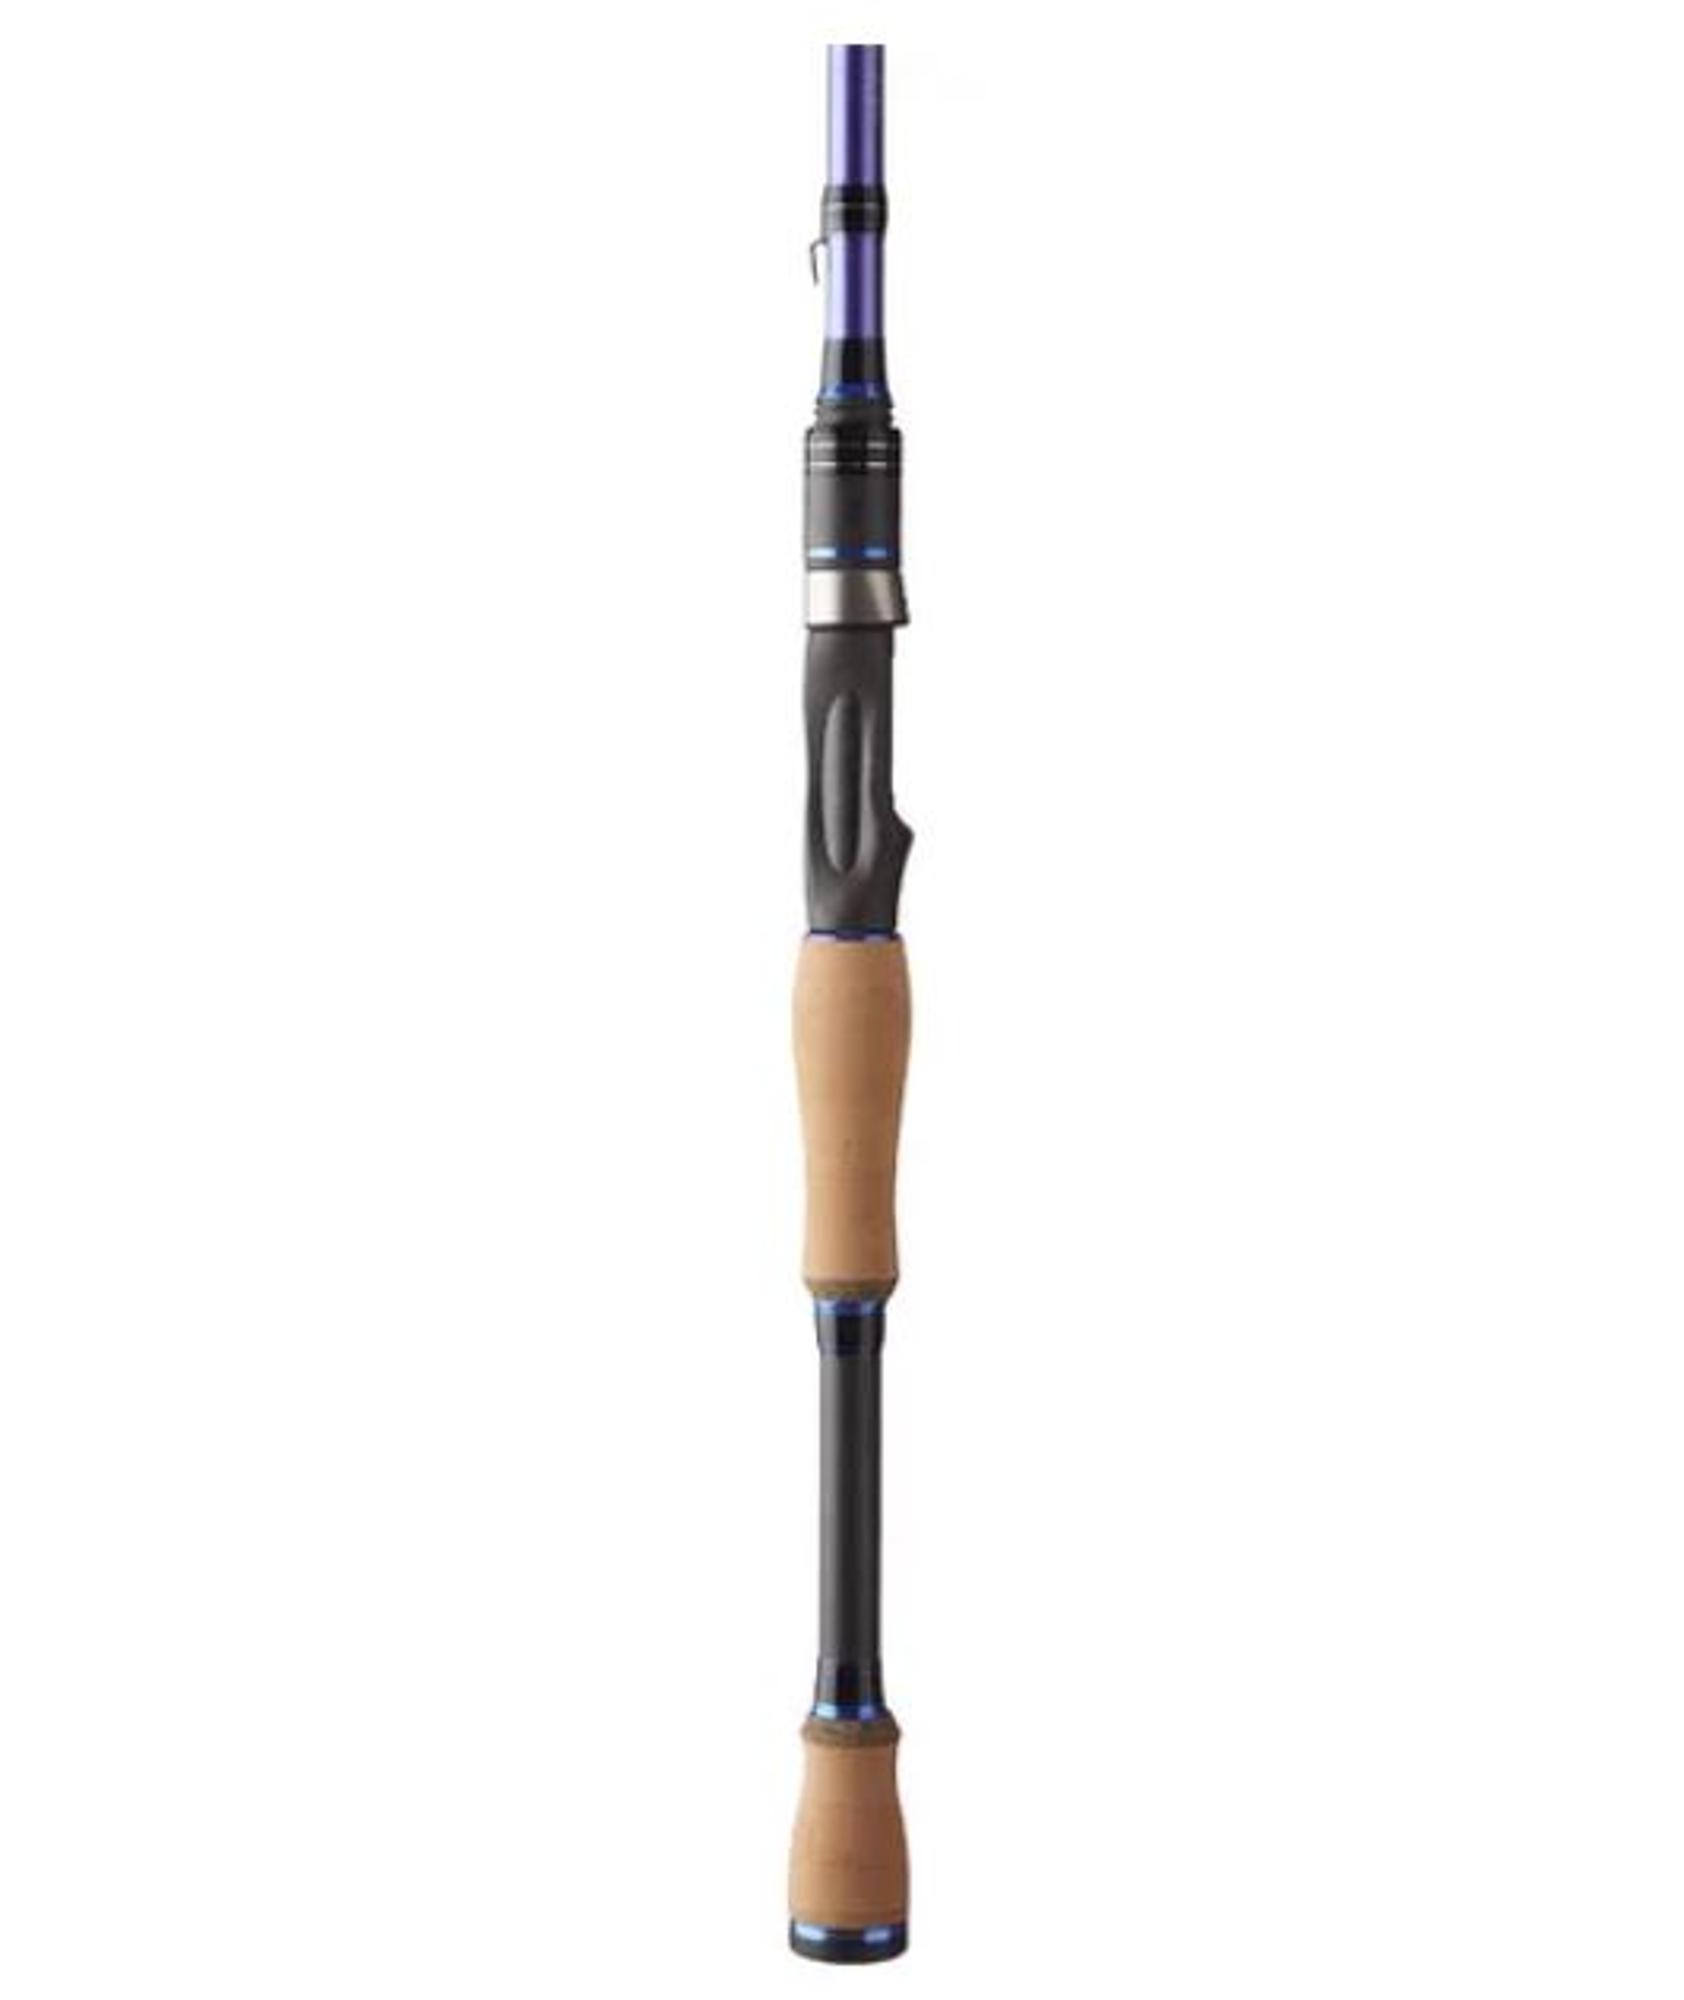 Endurance 755 CB 7ft 5in Medium Moderate Fast | 857489005541 | POWELL RODS | Fishing | Rods 